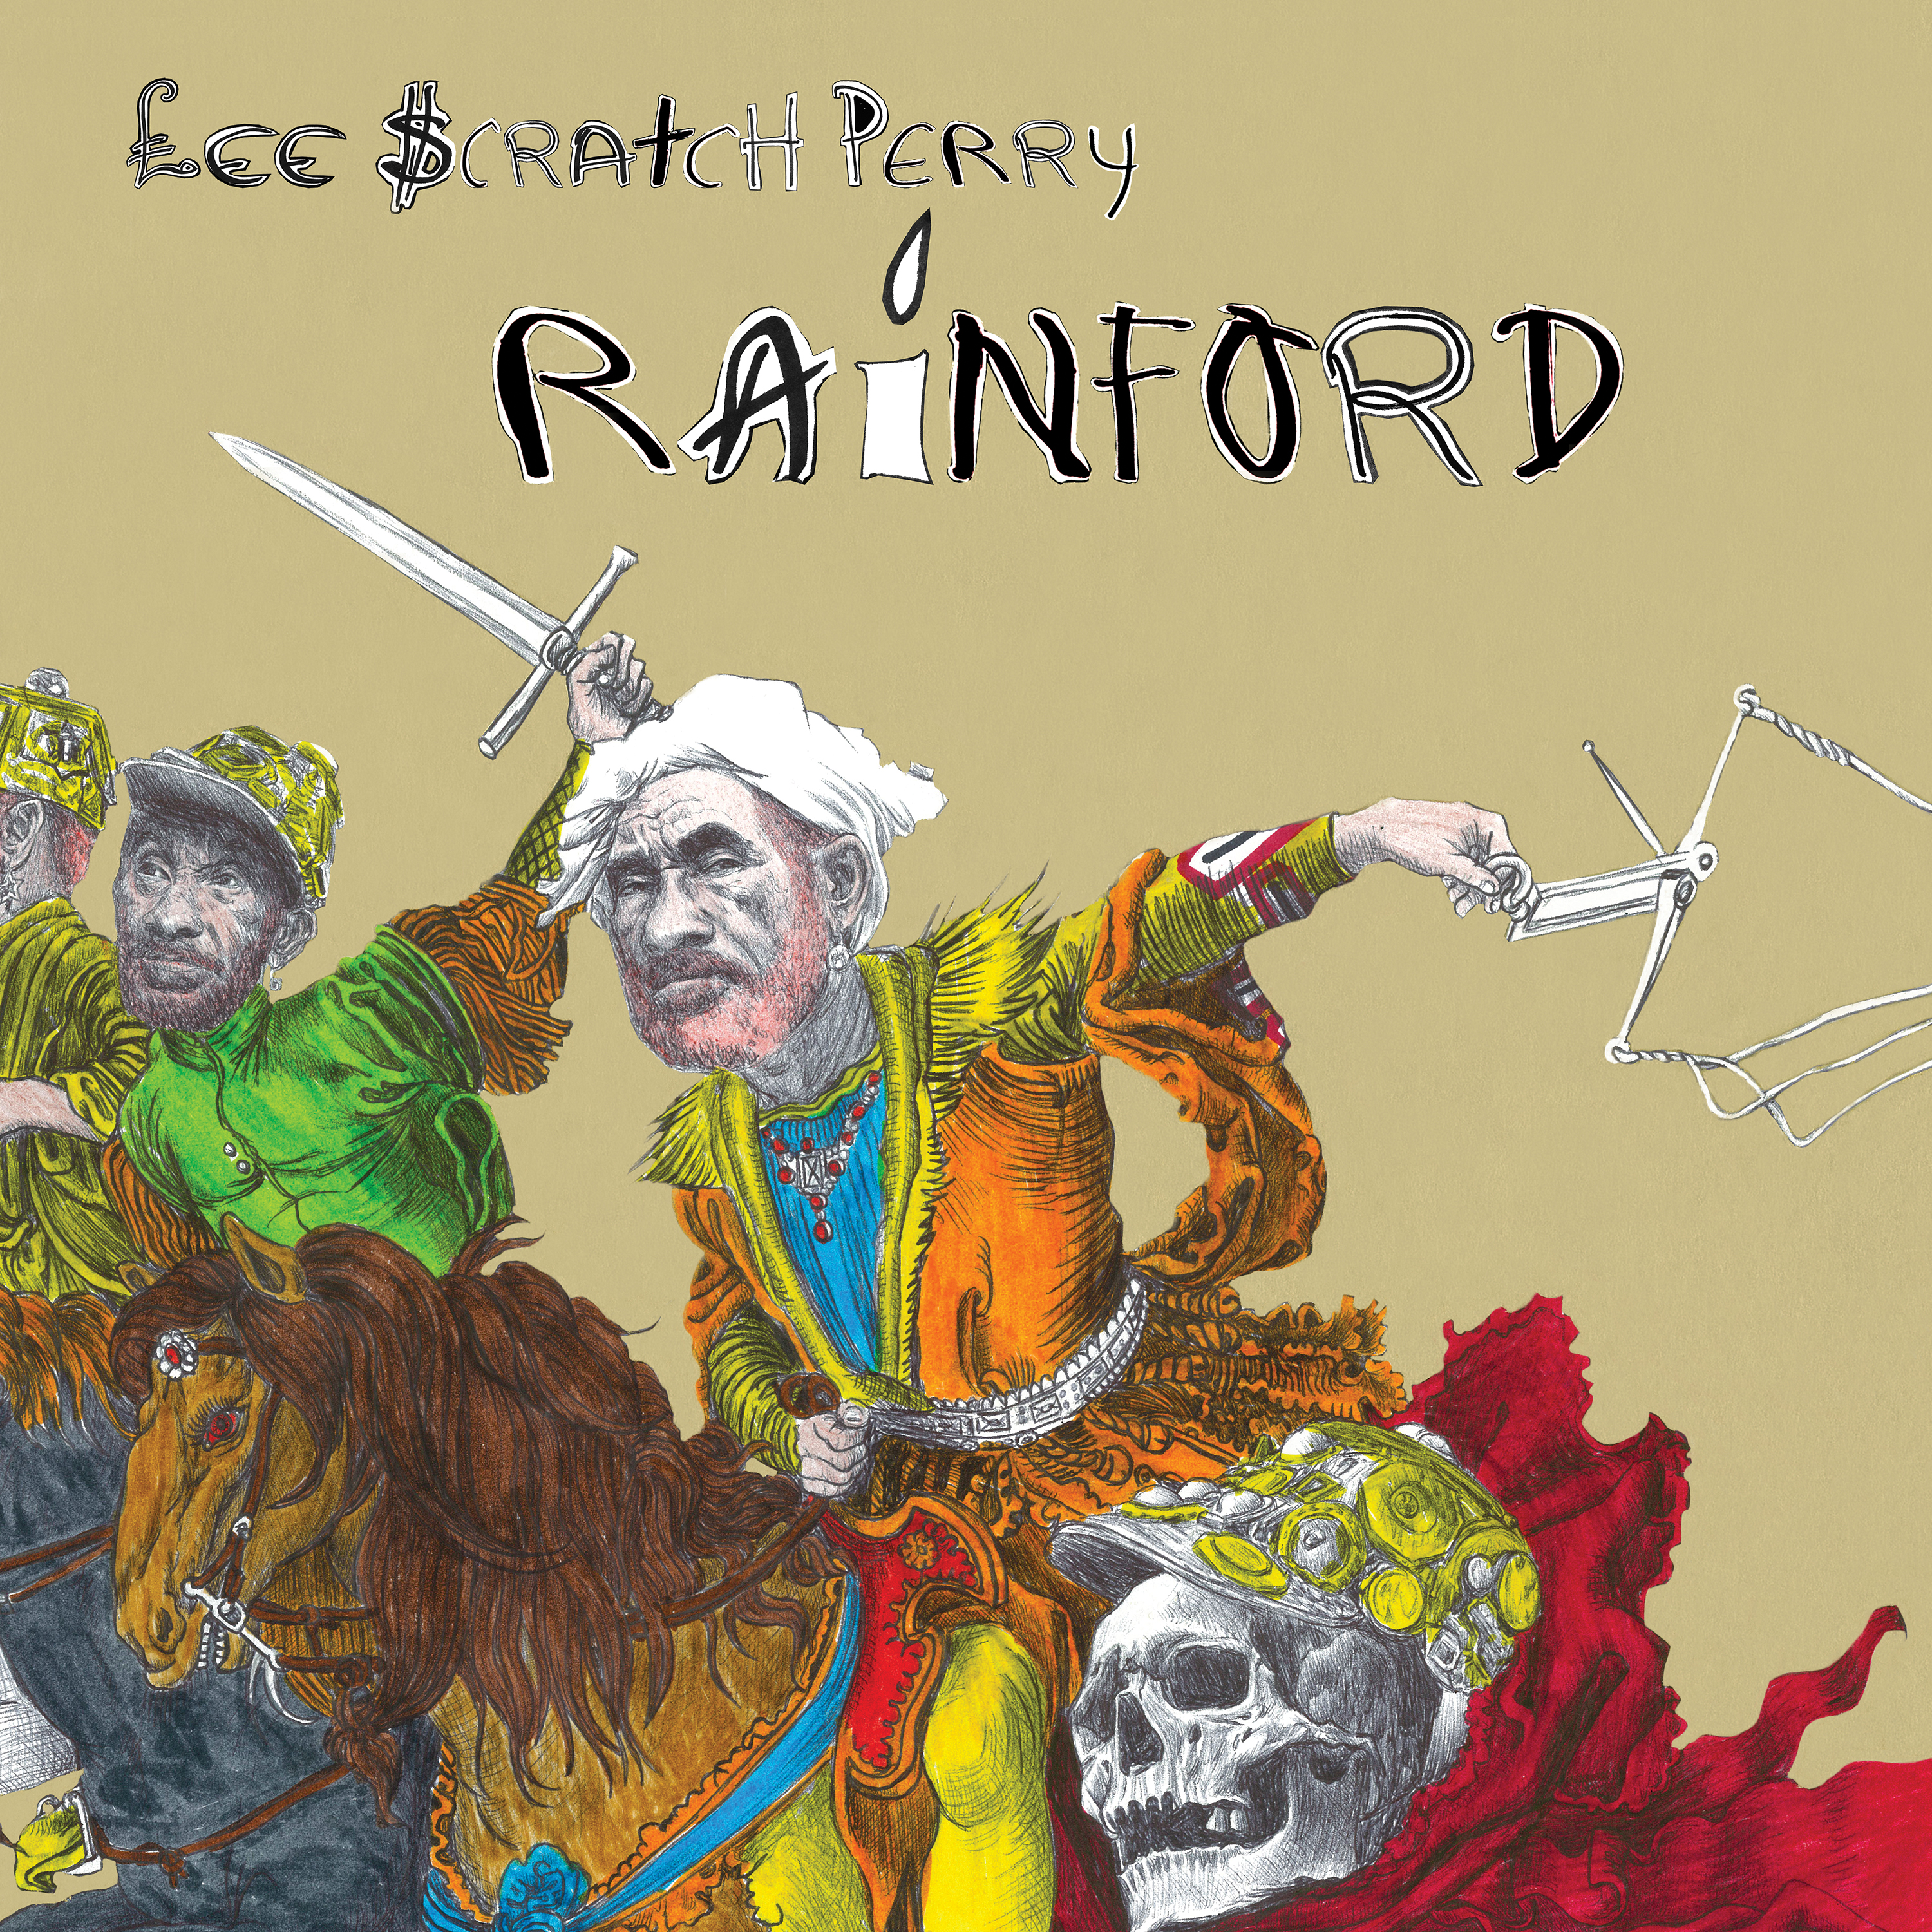 Album of the Week: Lee “Scratch” Perry – Rainford